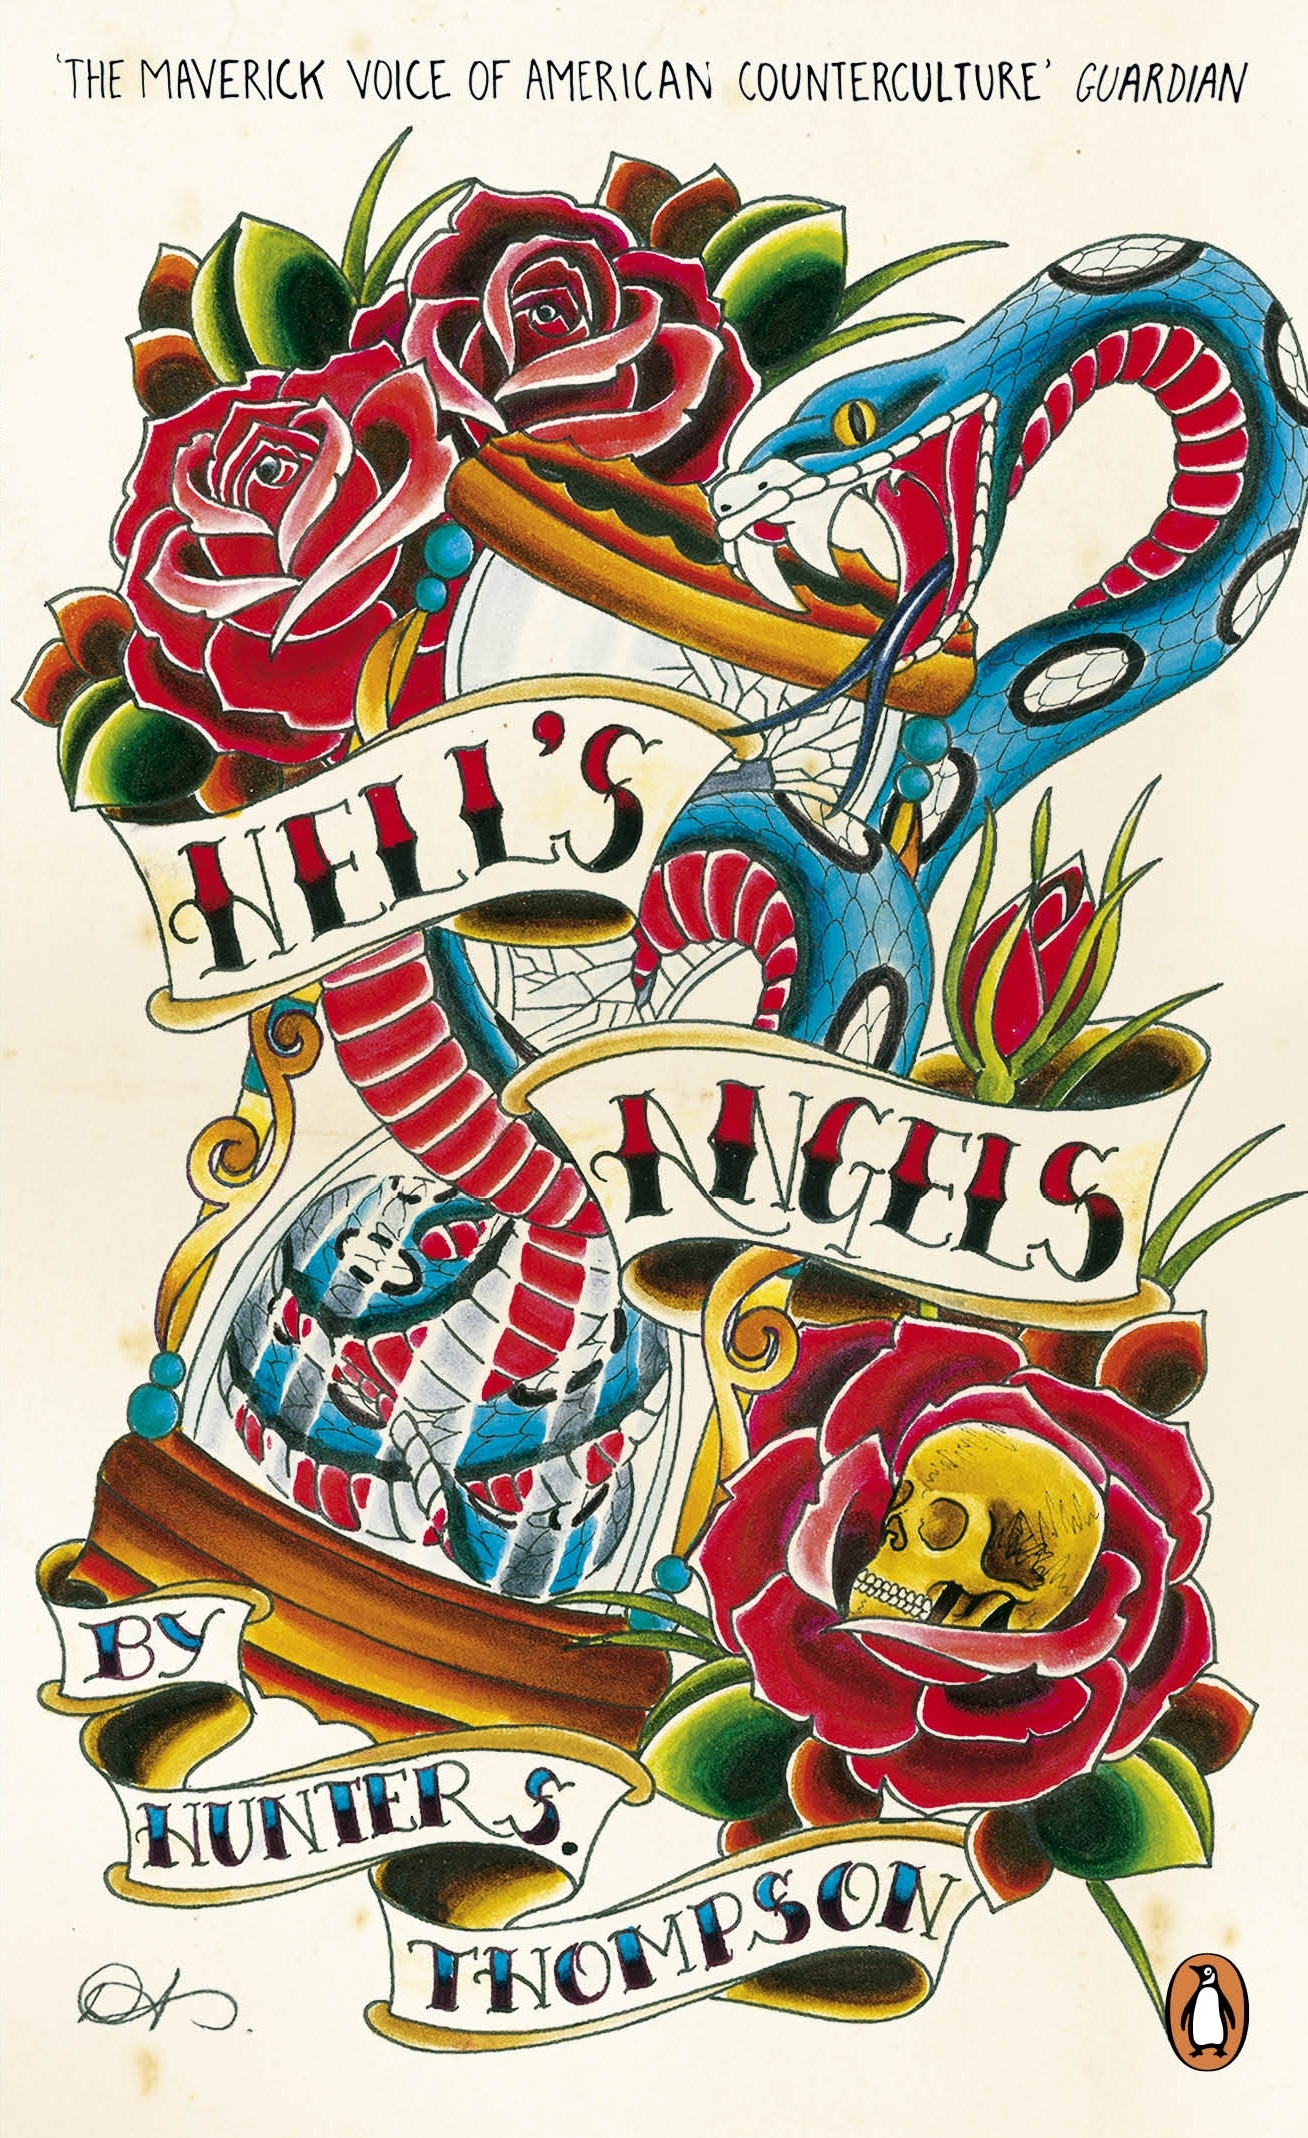 Book “Hell's Angels” by Hunter S Thompson — April 7, 2011